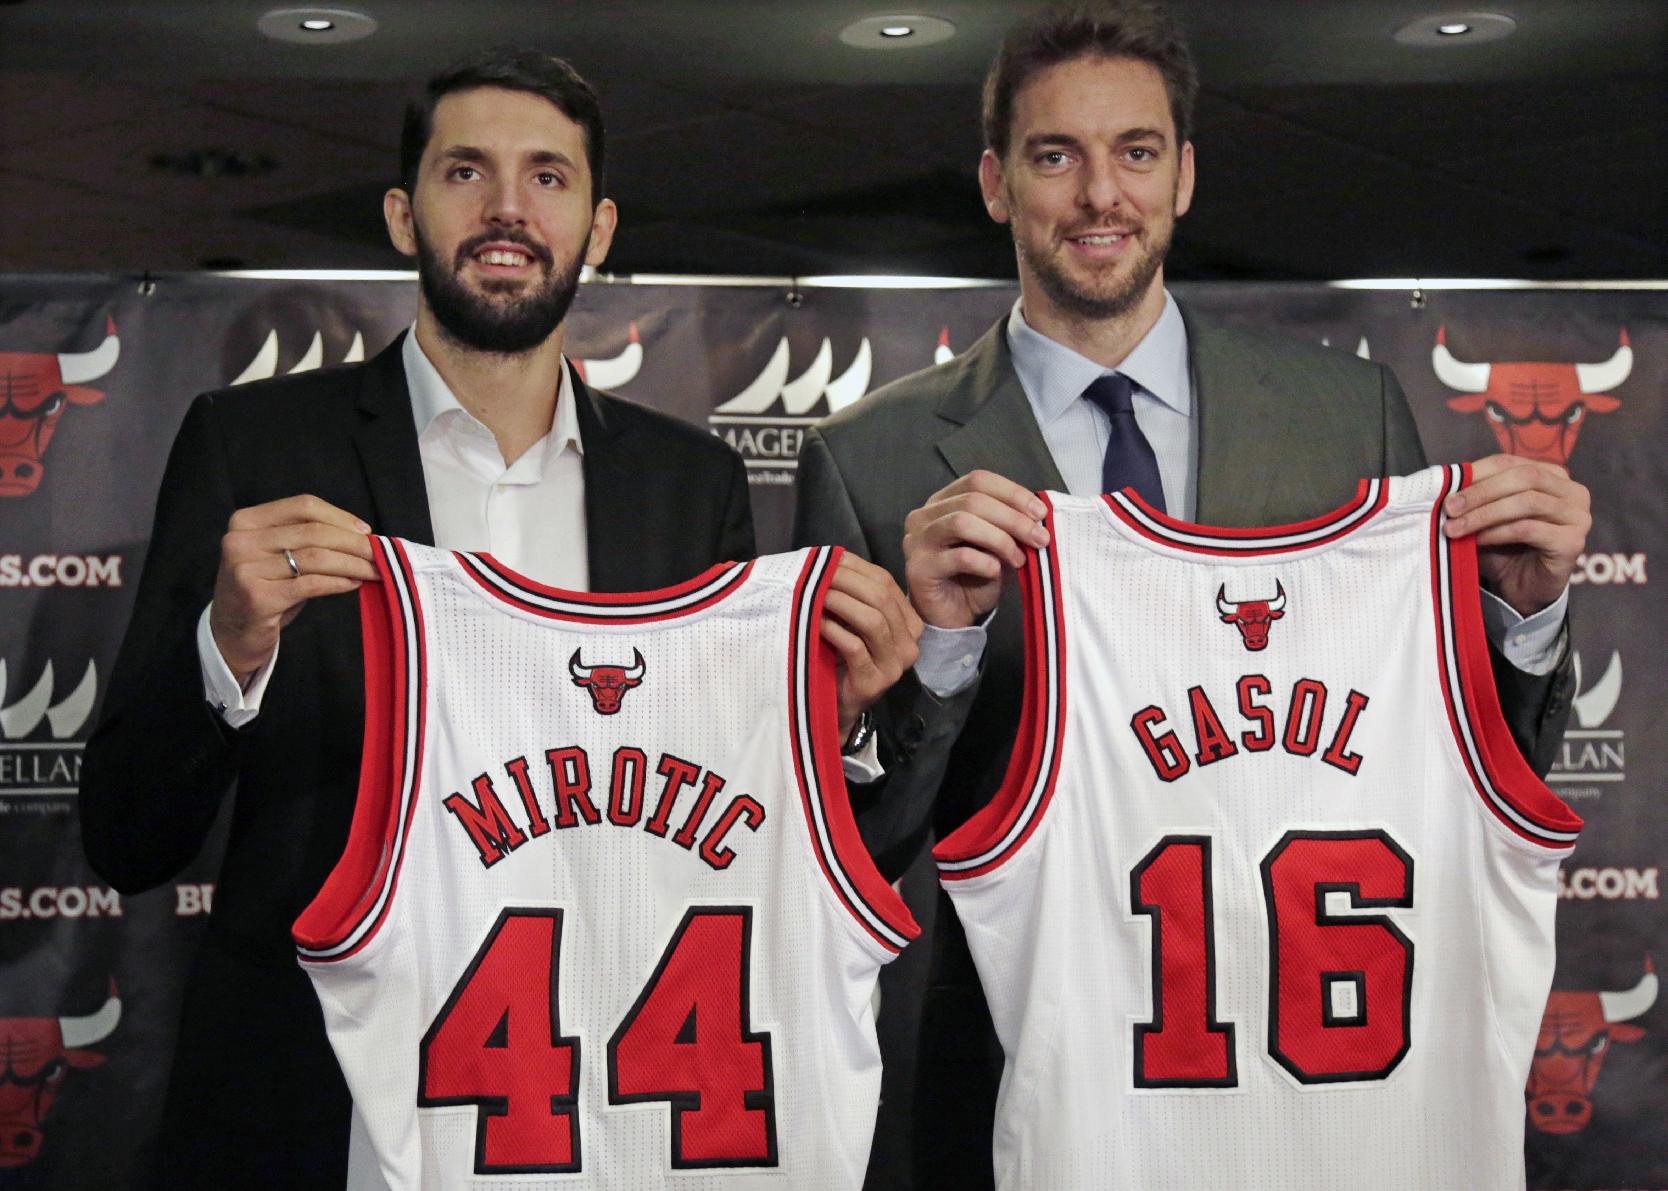 The Bulls hope Nikola Mirotic (left) and Pau Gasol will help bolster their offensive attack. (AP/M. Spencer Green)